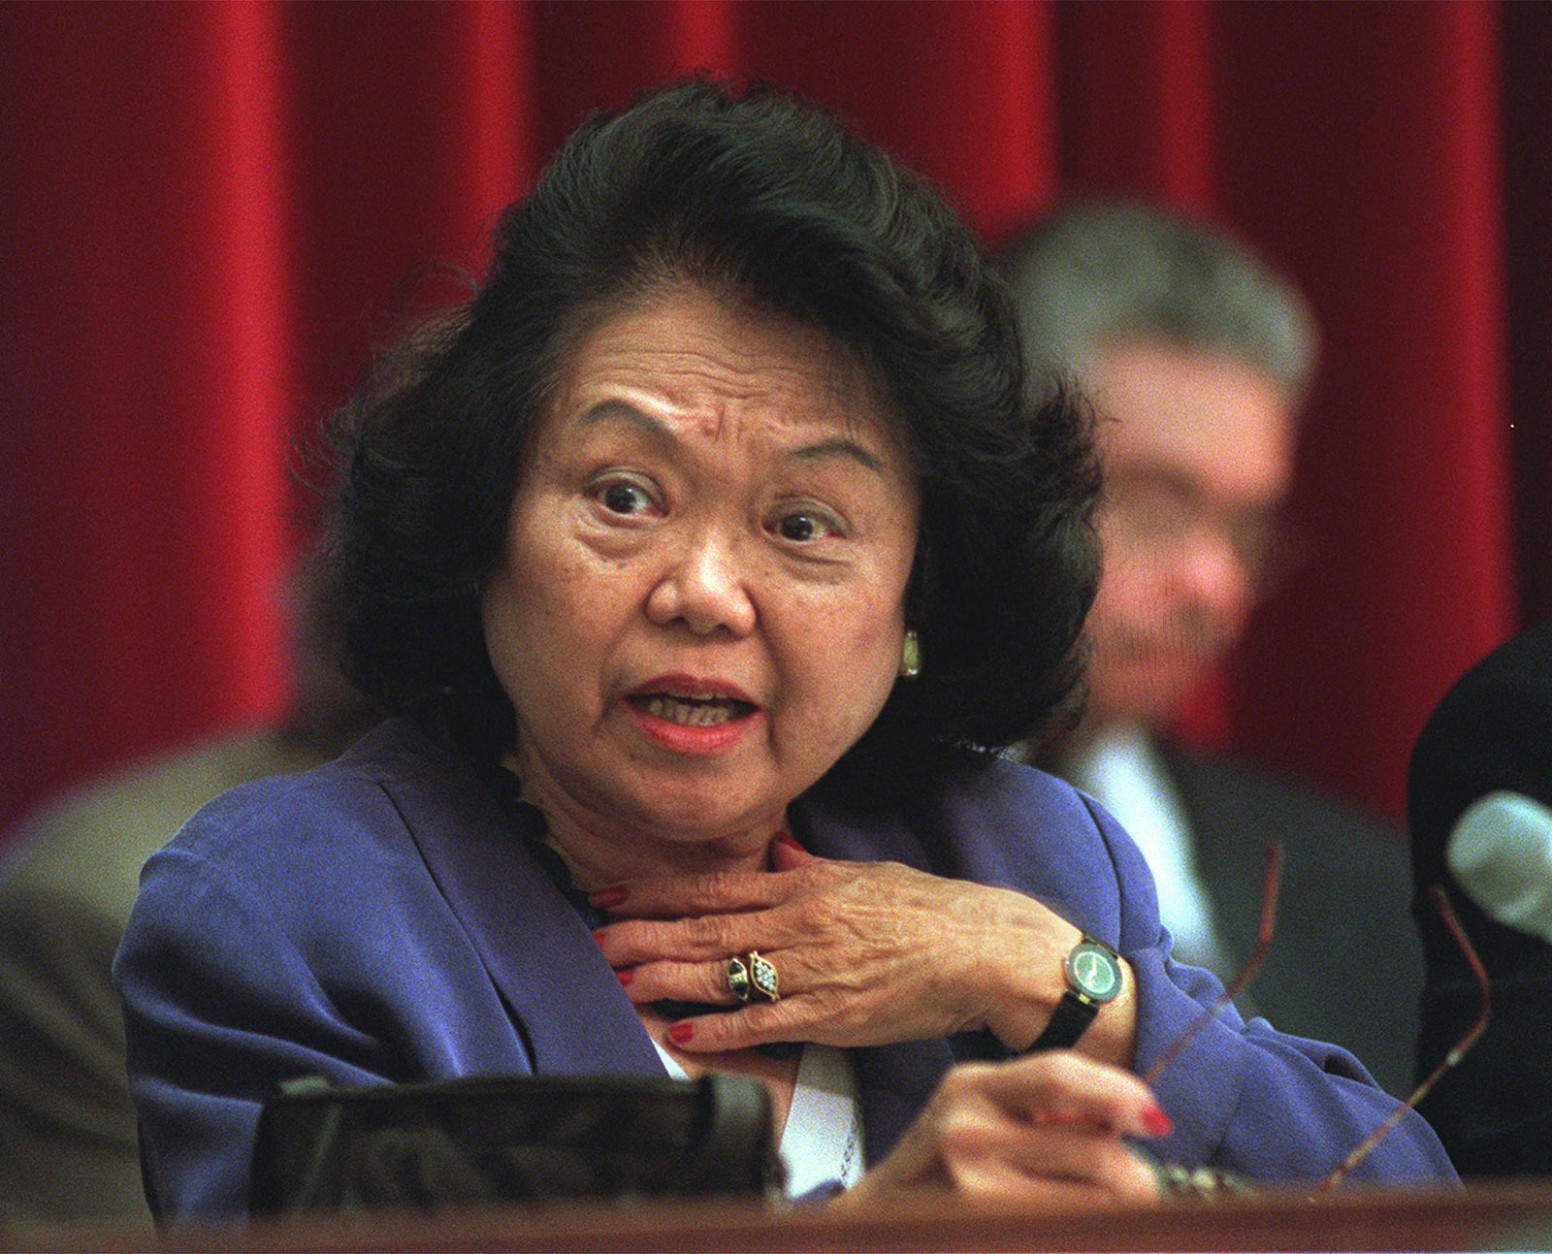 Rep. Patsy Mink, D-Hawaii takes part in a hearing of the House Education and the Workforce Committee hearing on the whether to issue subpoenas on the 1996 Teamsters elections. (AP Photo/Karin Cooper)